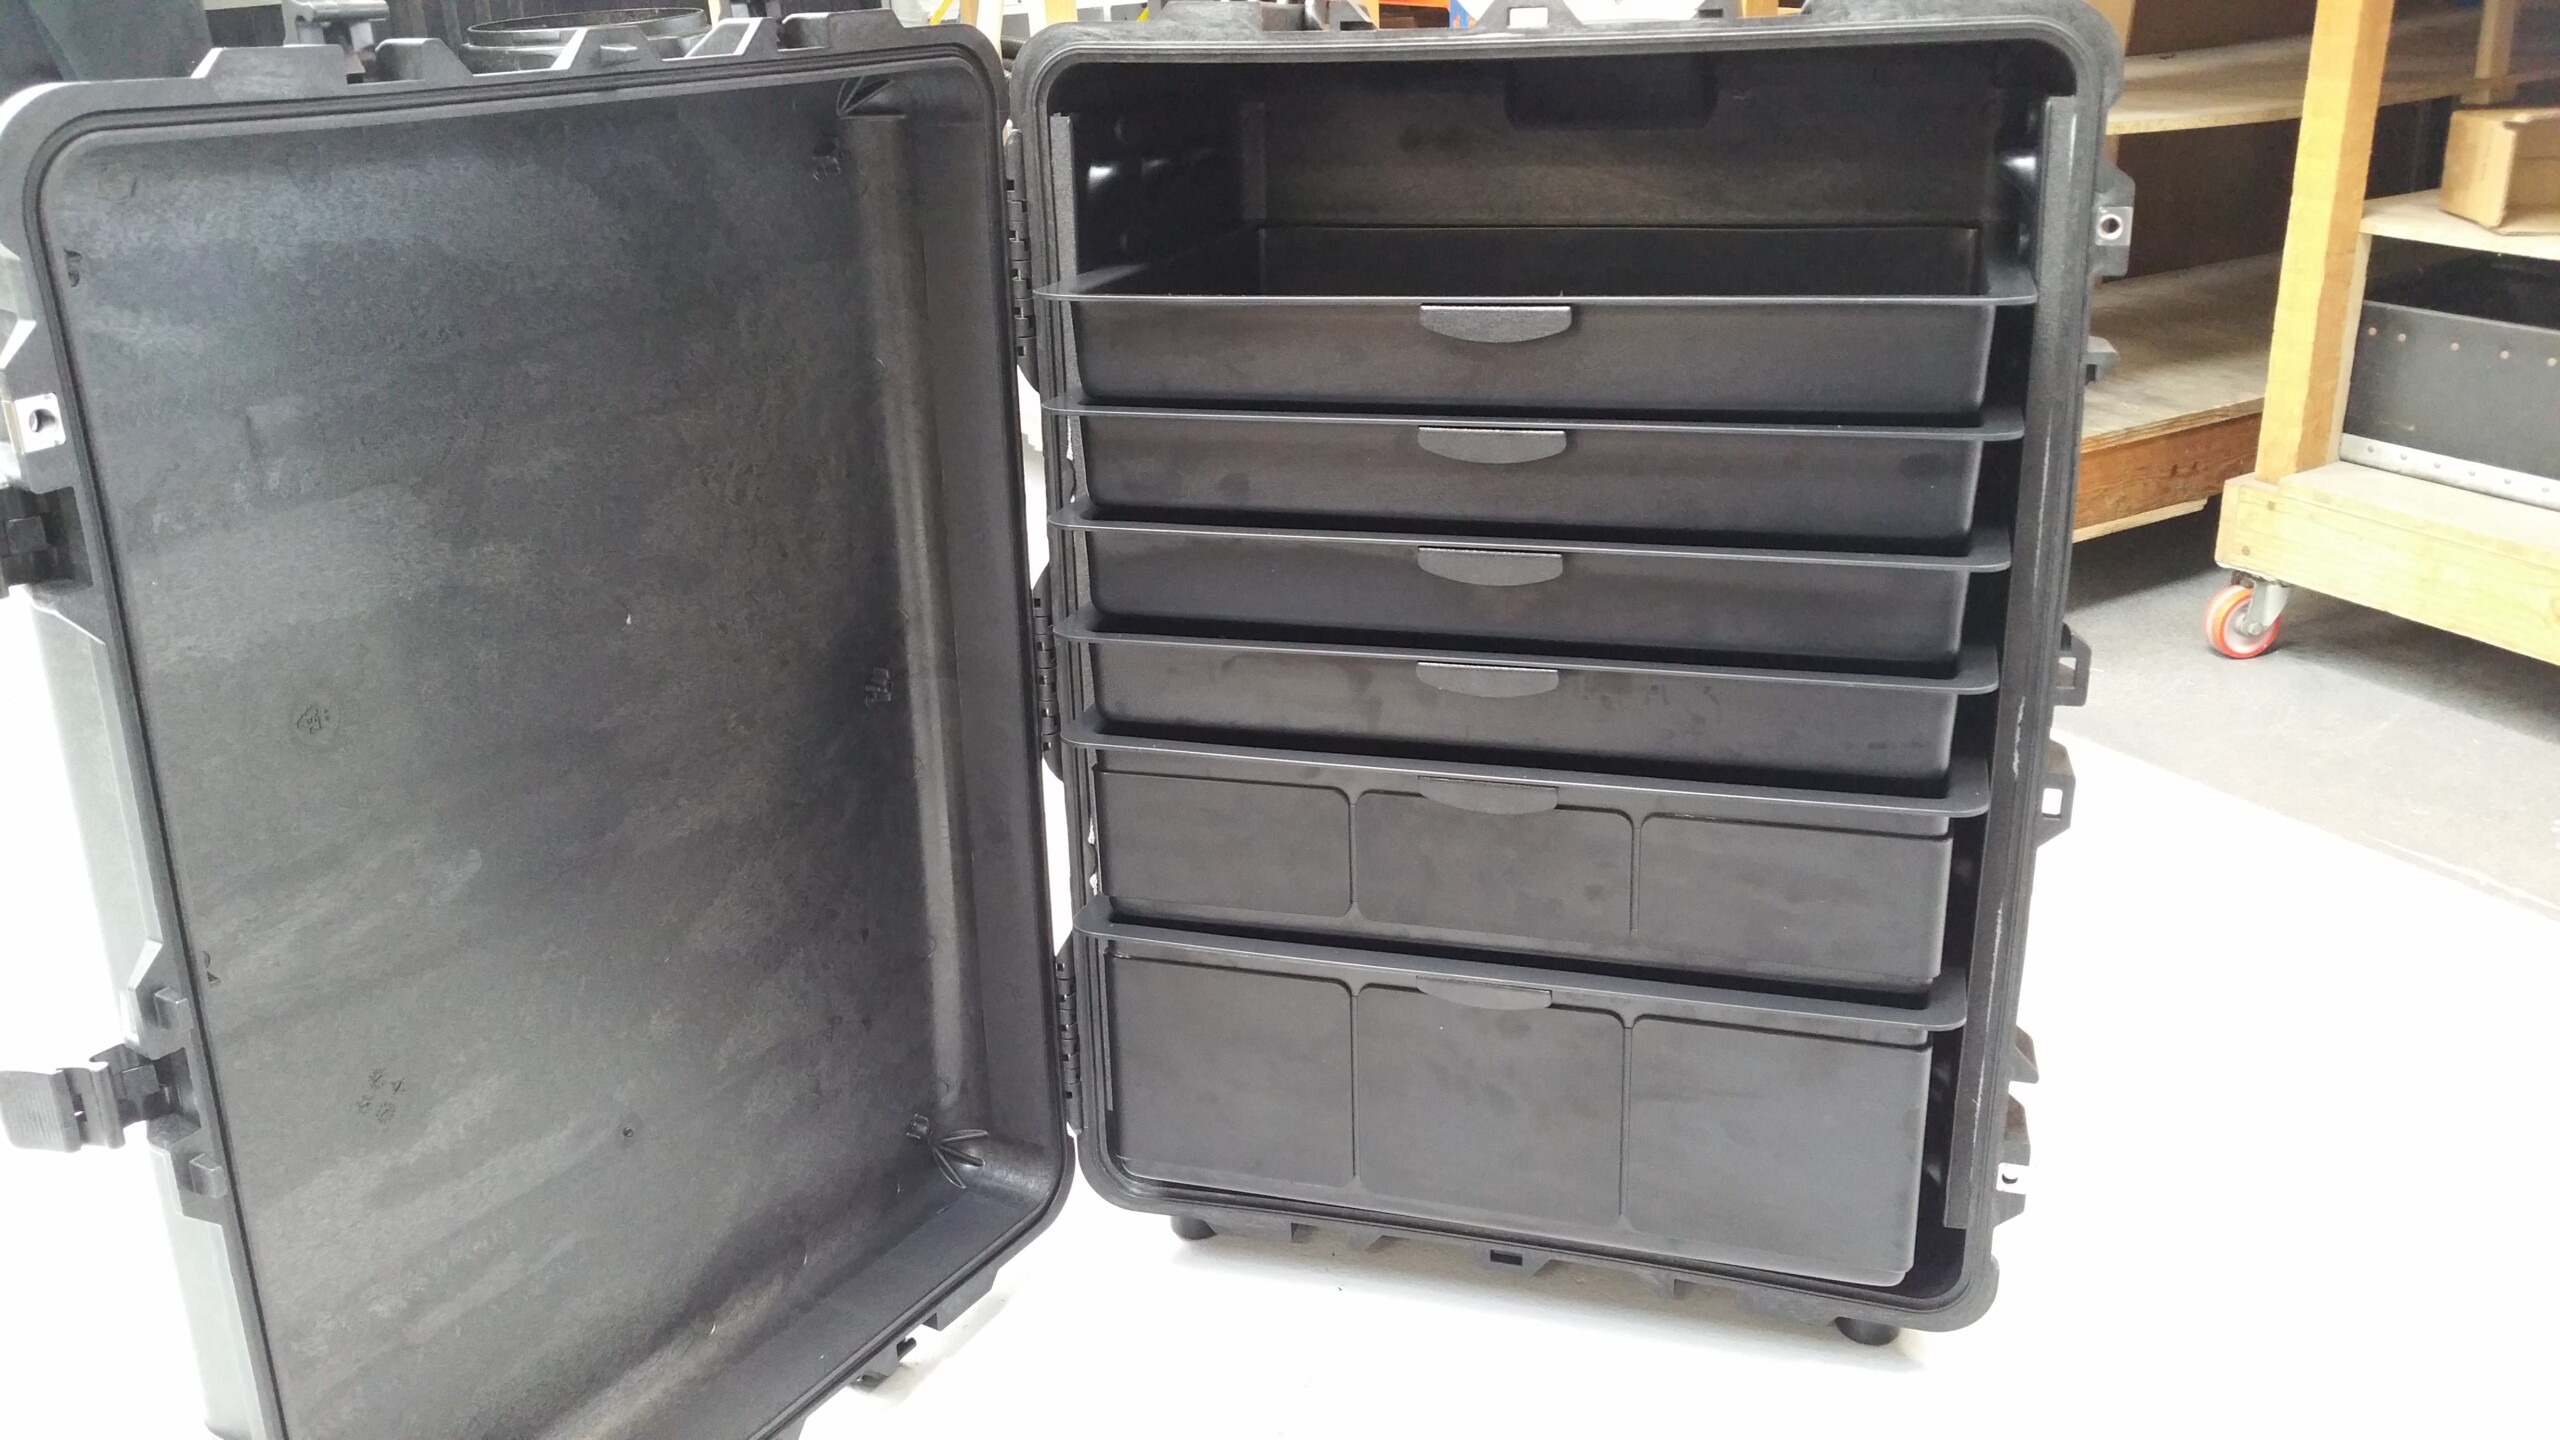 Peli cases thermal packaging manufacture by Bray Plastics